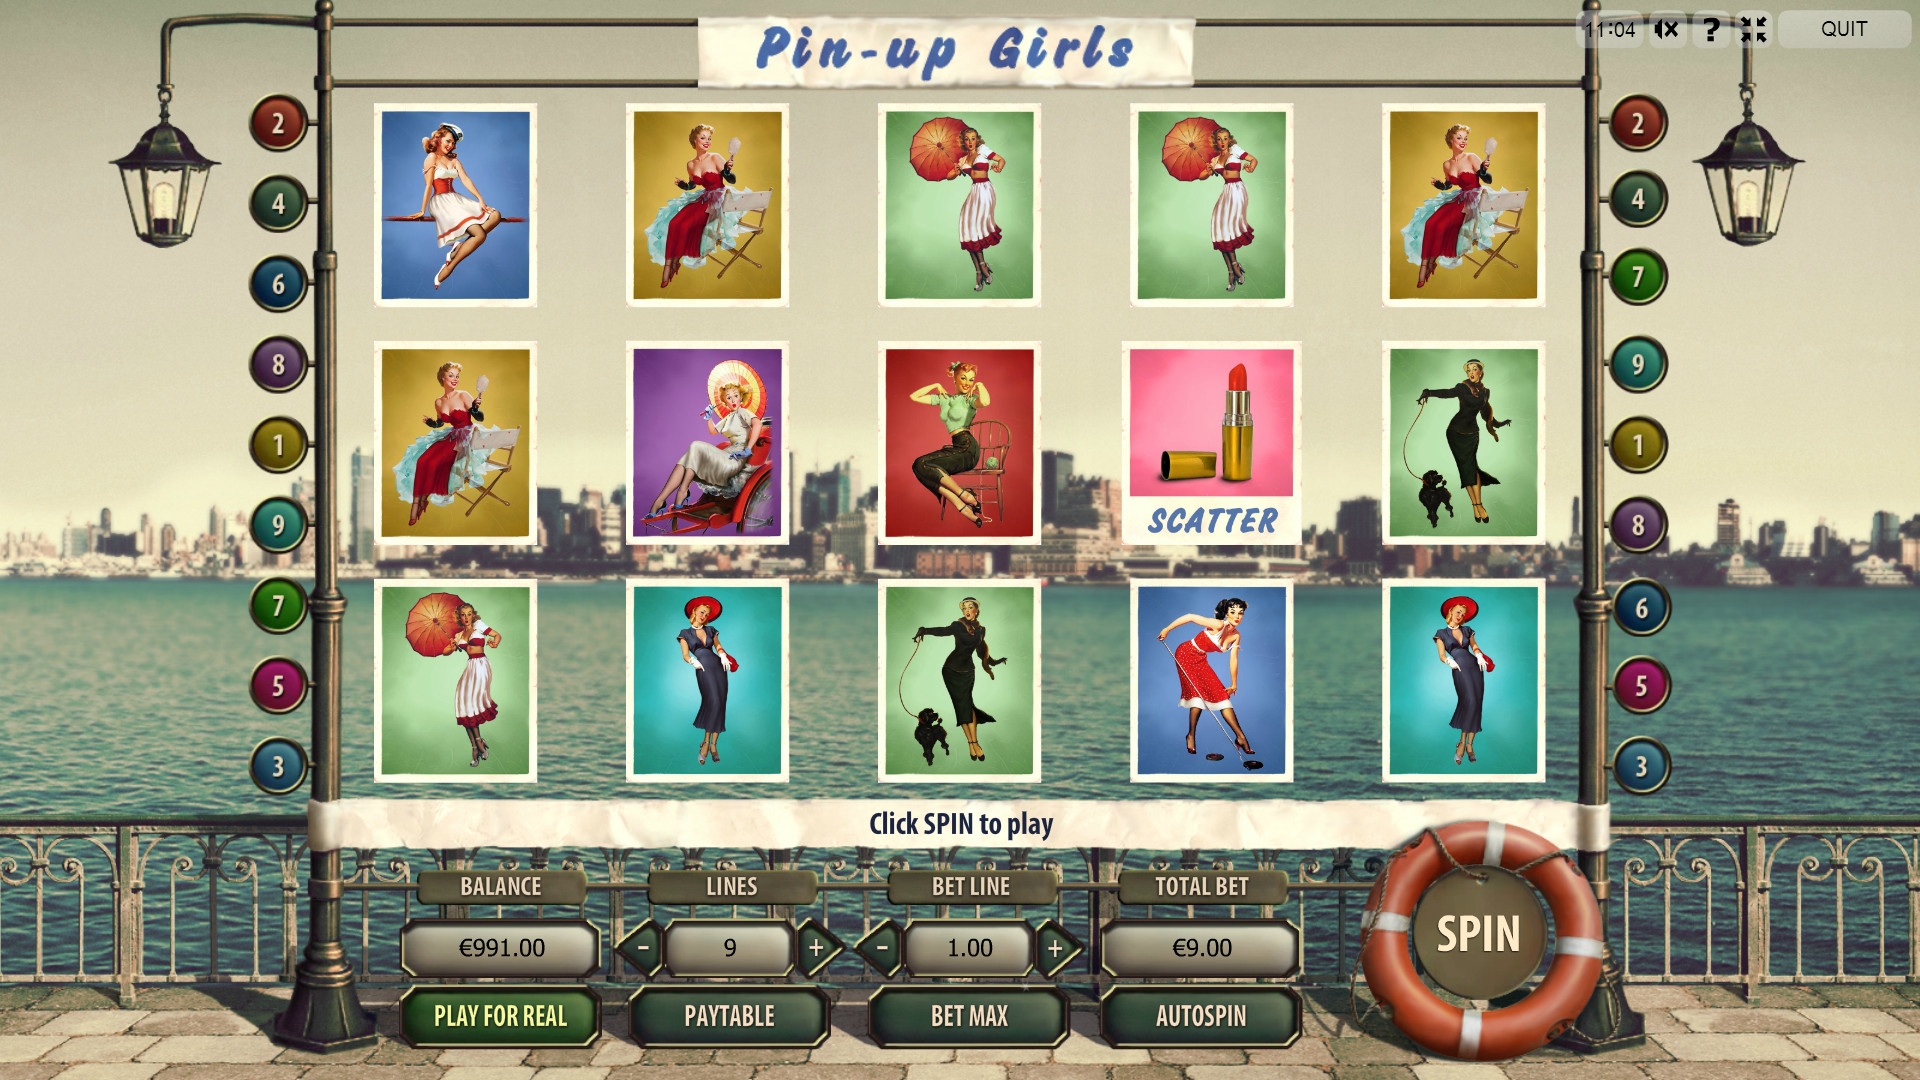 Pin-Up Girls (Pin-Up Girls) from category Slots